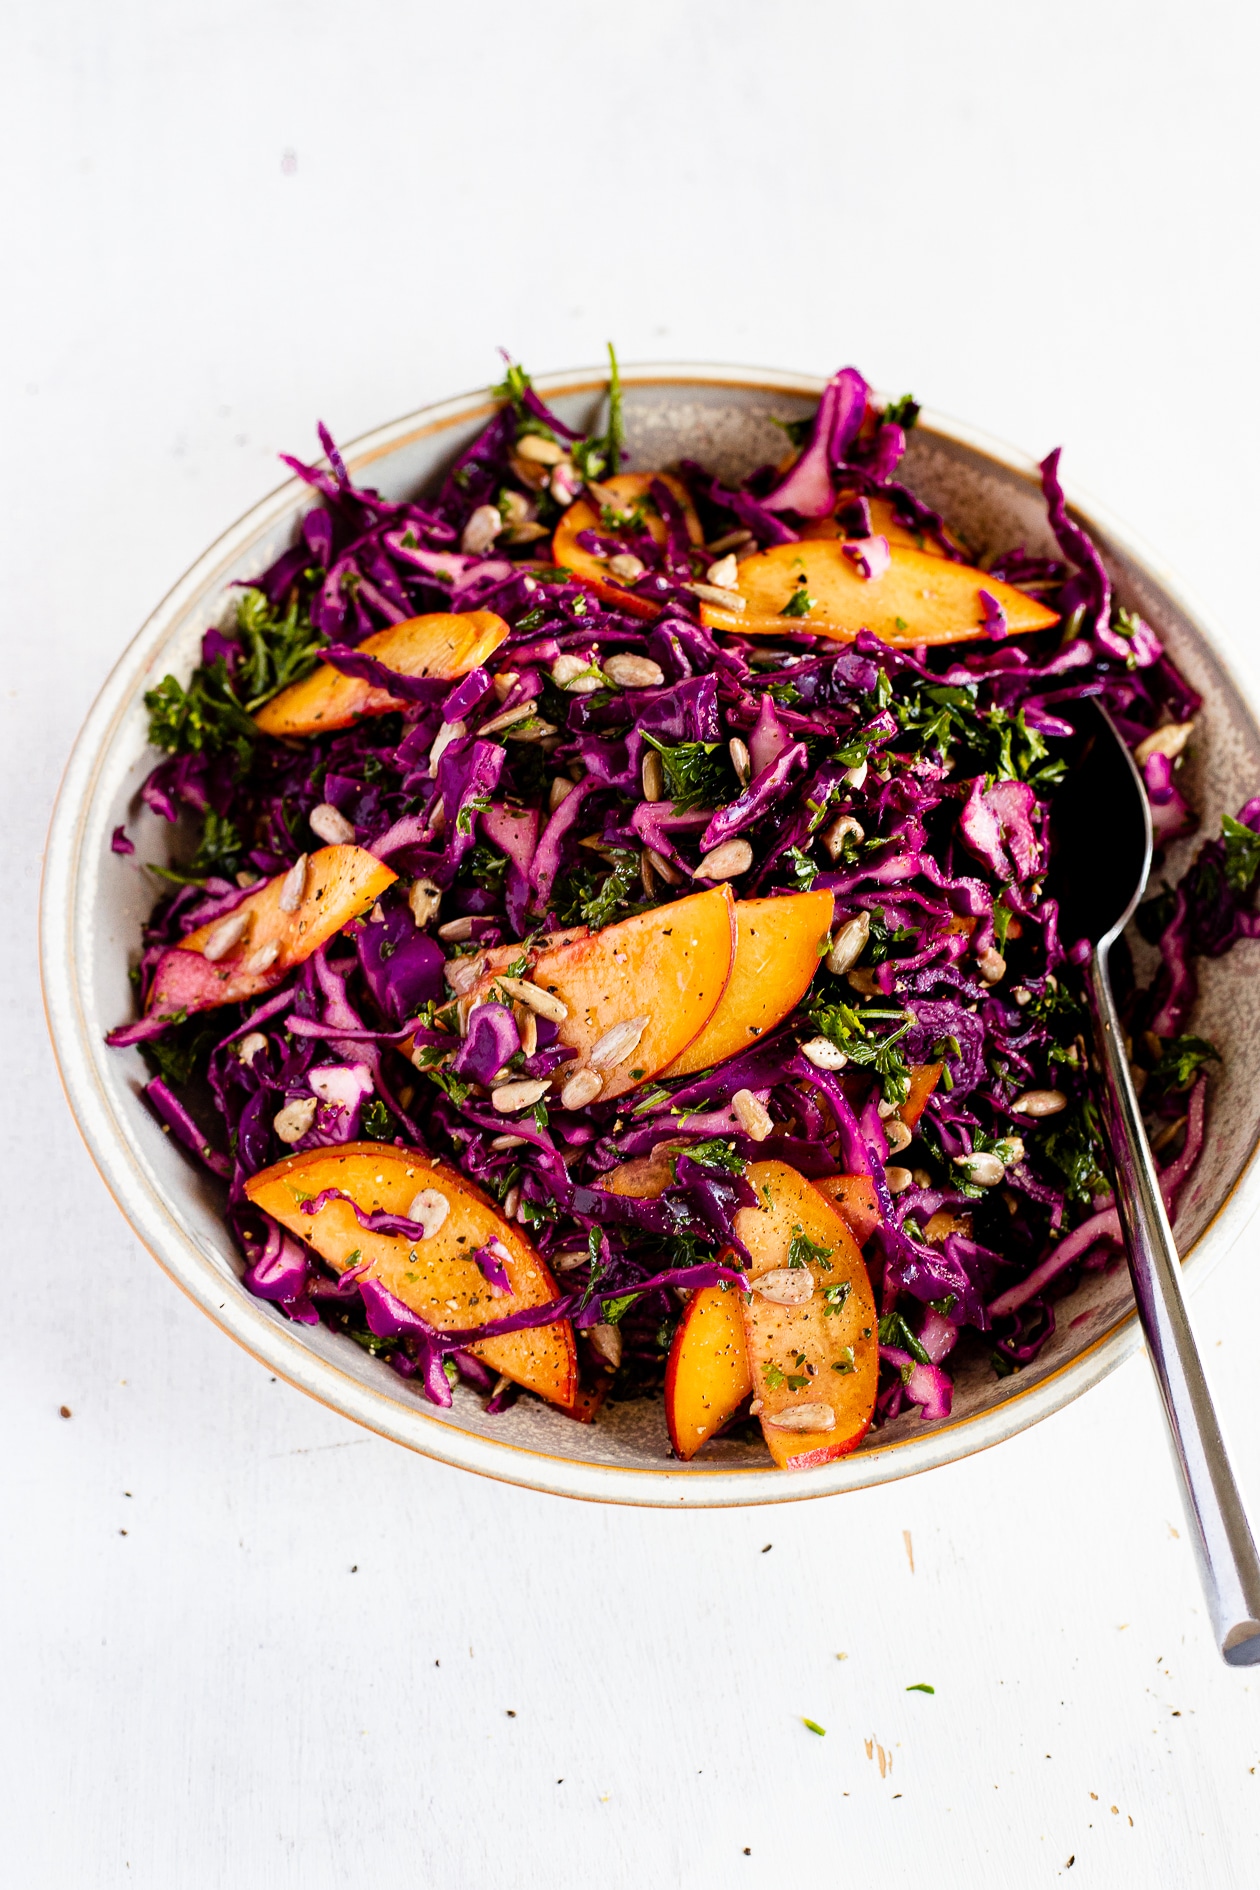 SUMMER SLAW WITH PEACHES AND PARSLEY